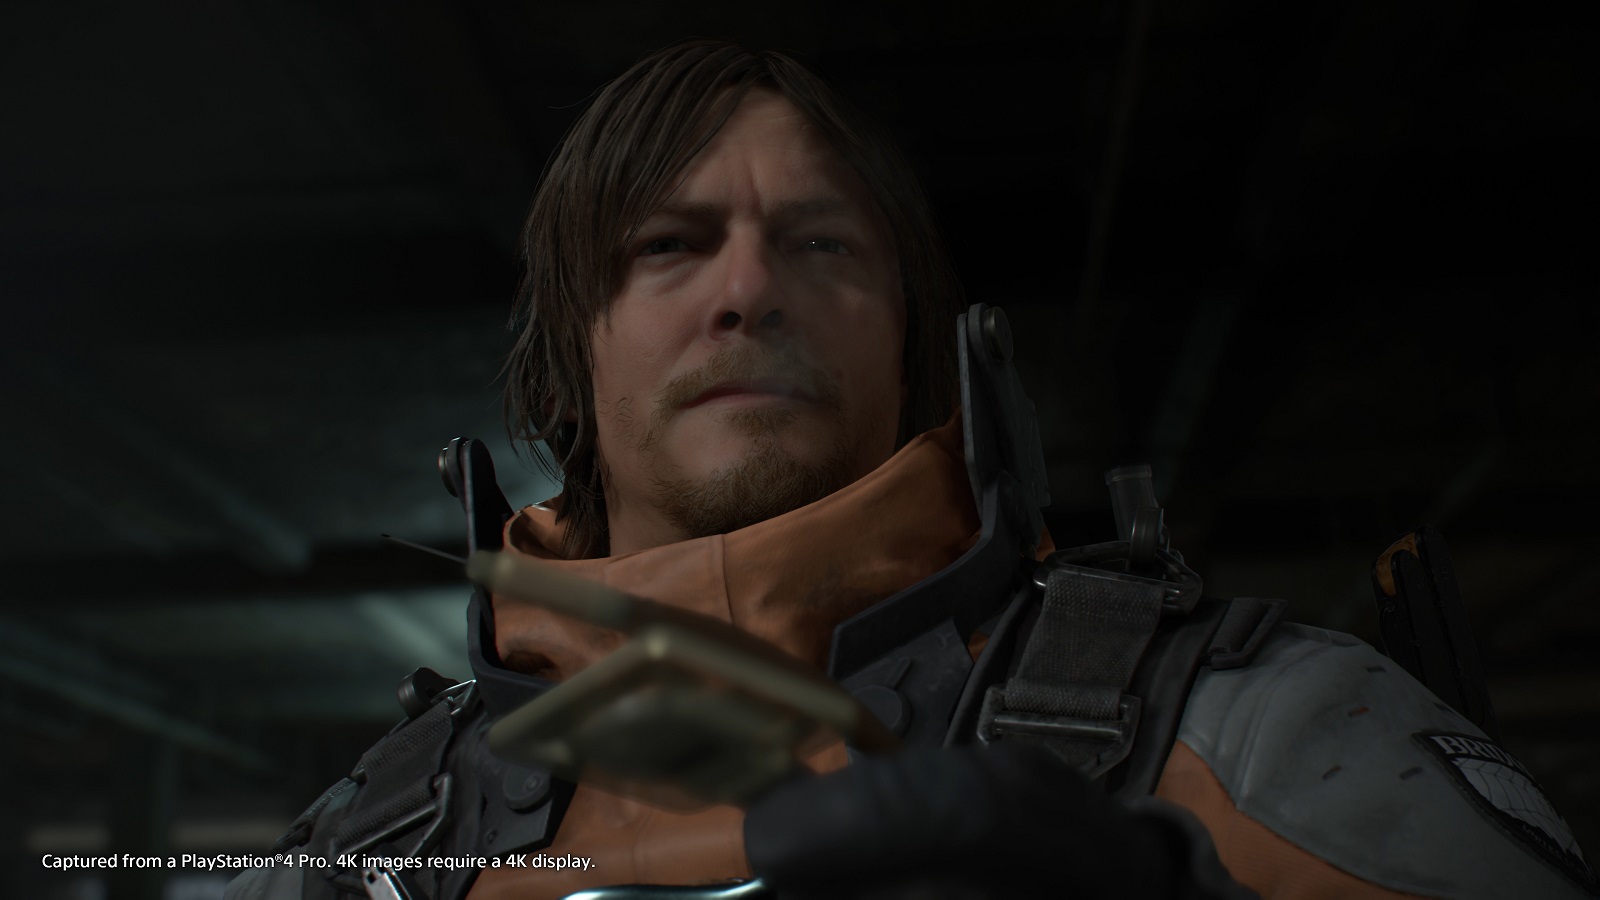 505 Games » DEATH STRANDING DIRECTOR'S Out Now On PC